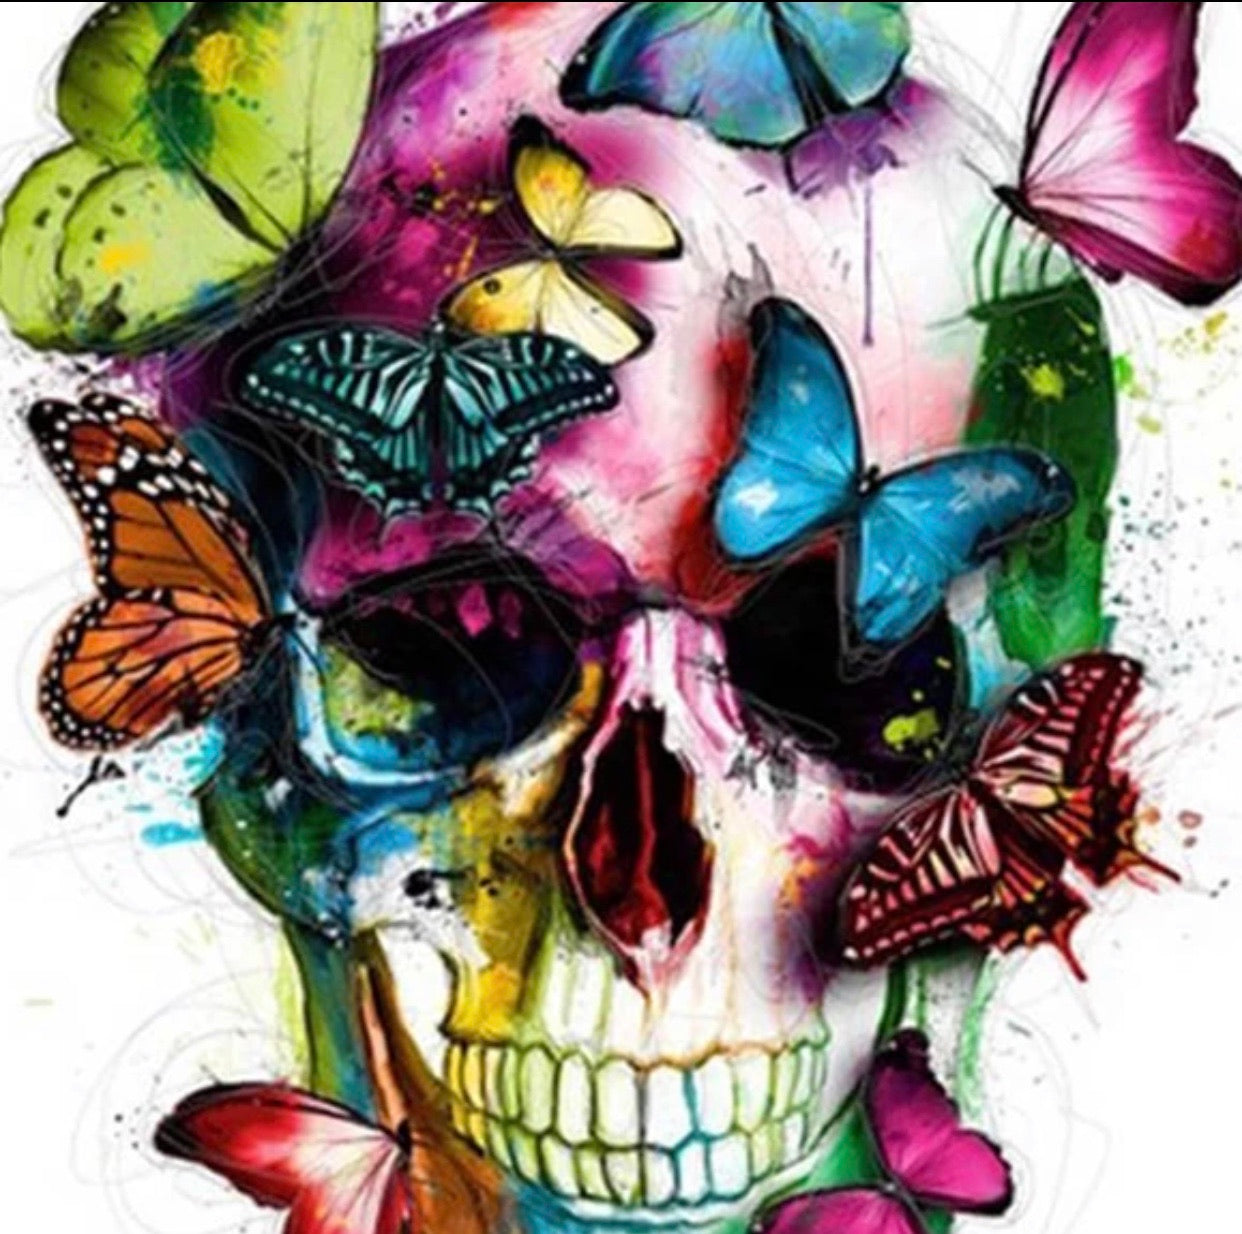 30 x 40 full drill diamond painting - (Fkw1254) butterflies with skull